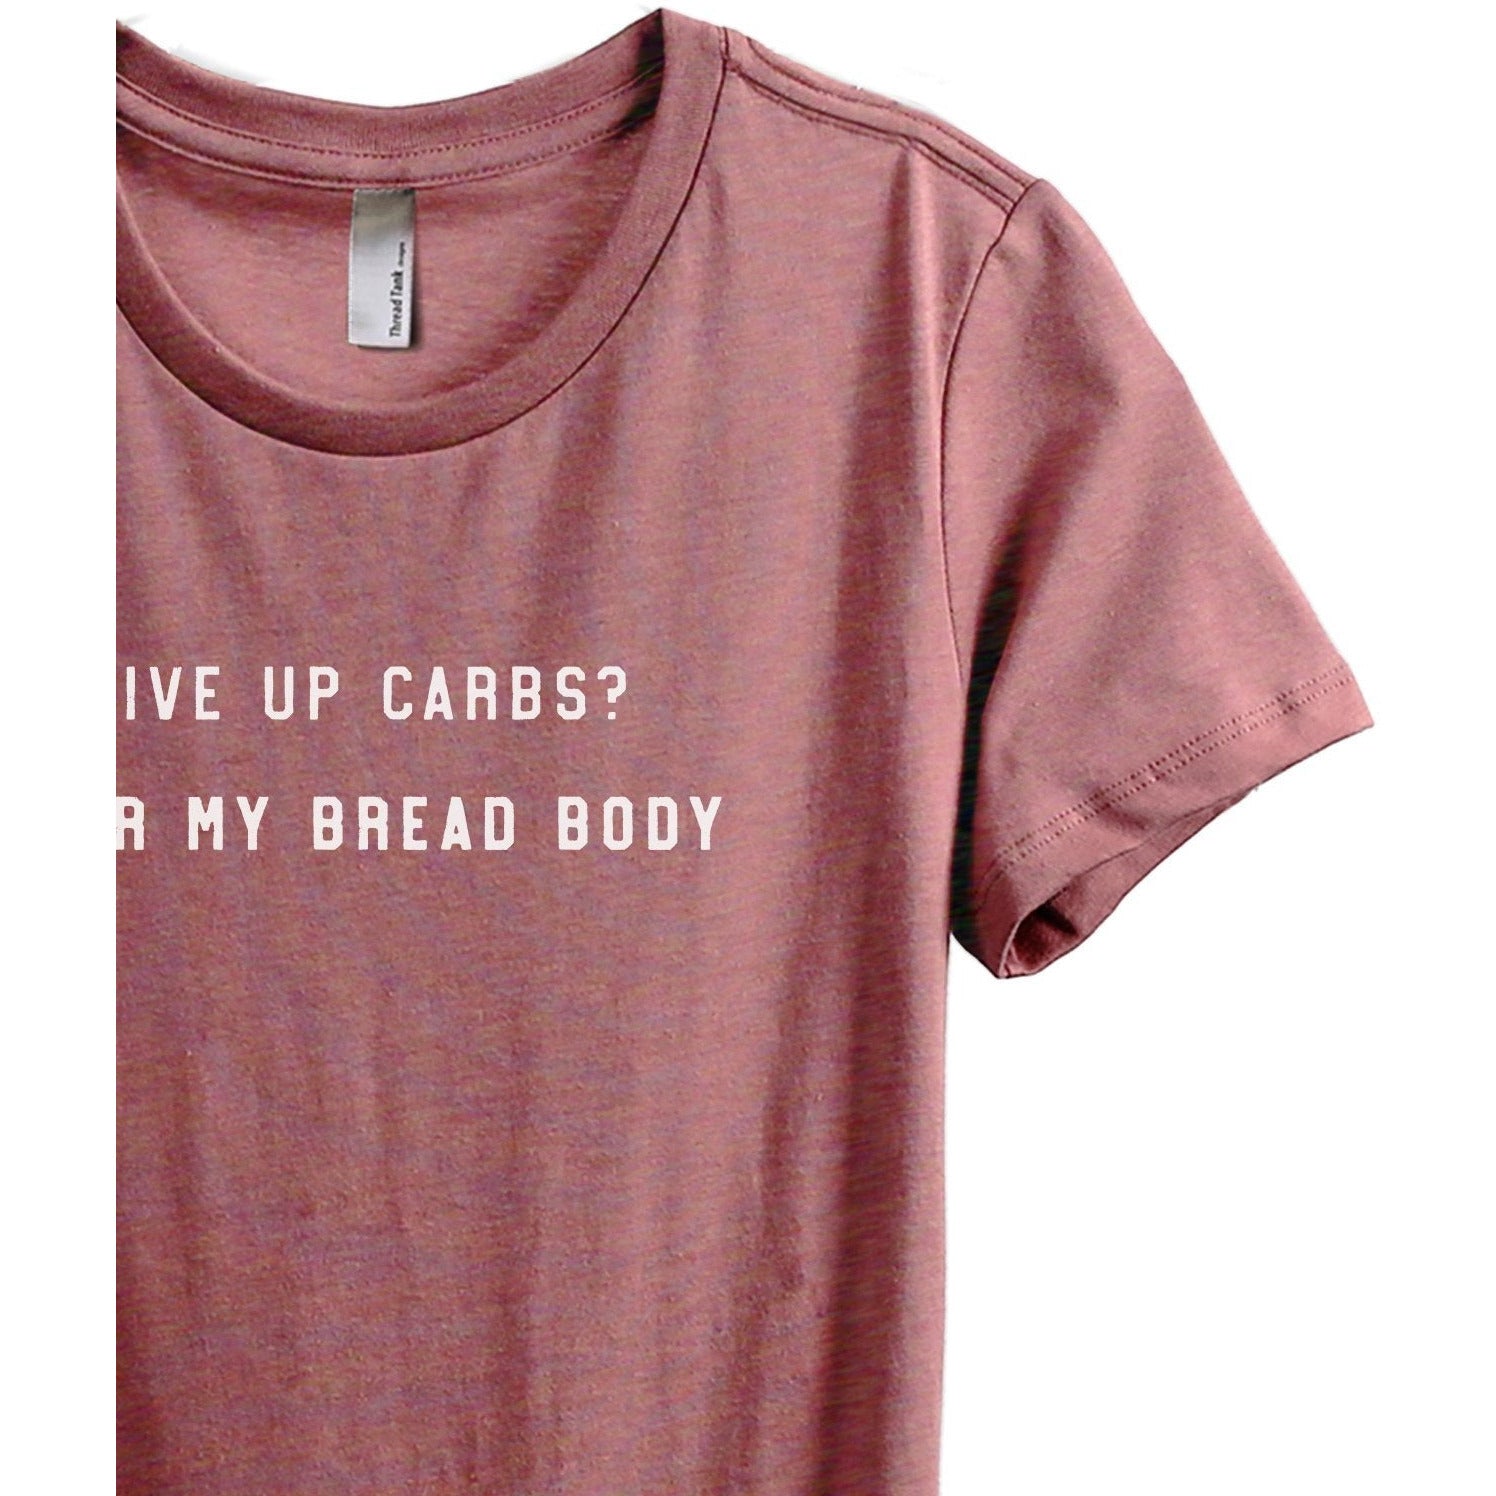 Give Up Carbs Over My Bread Body Women's Relaxed Crewneck T-Shirt Top Tee Heather Rouge